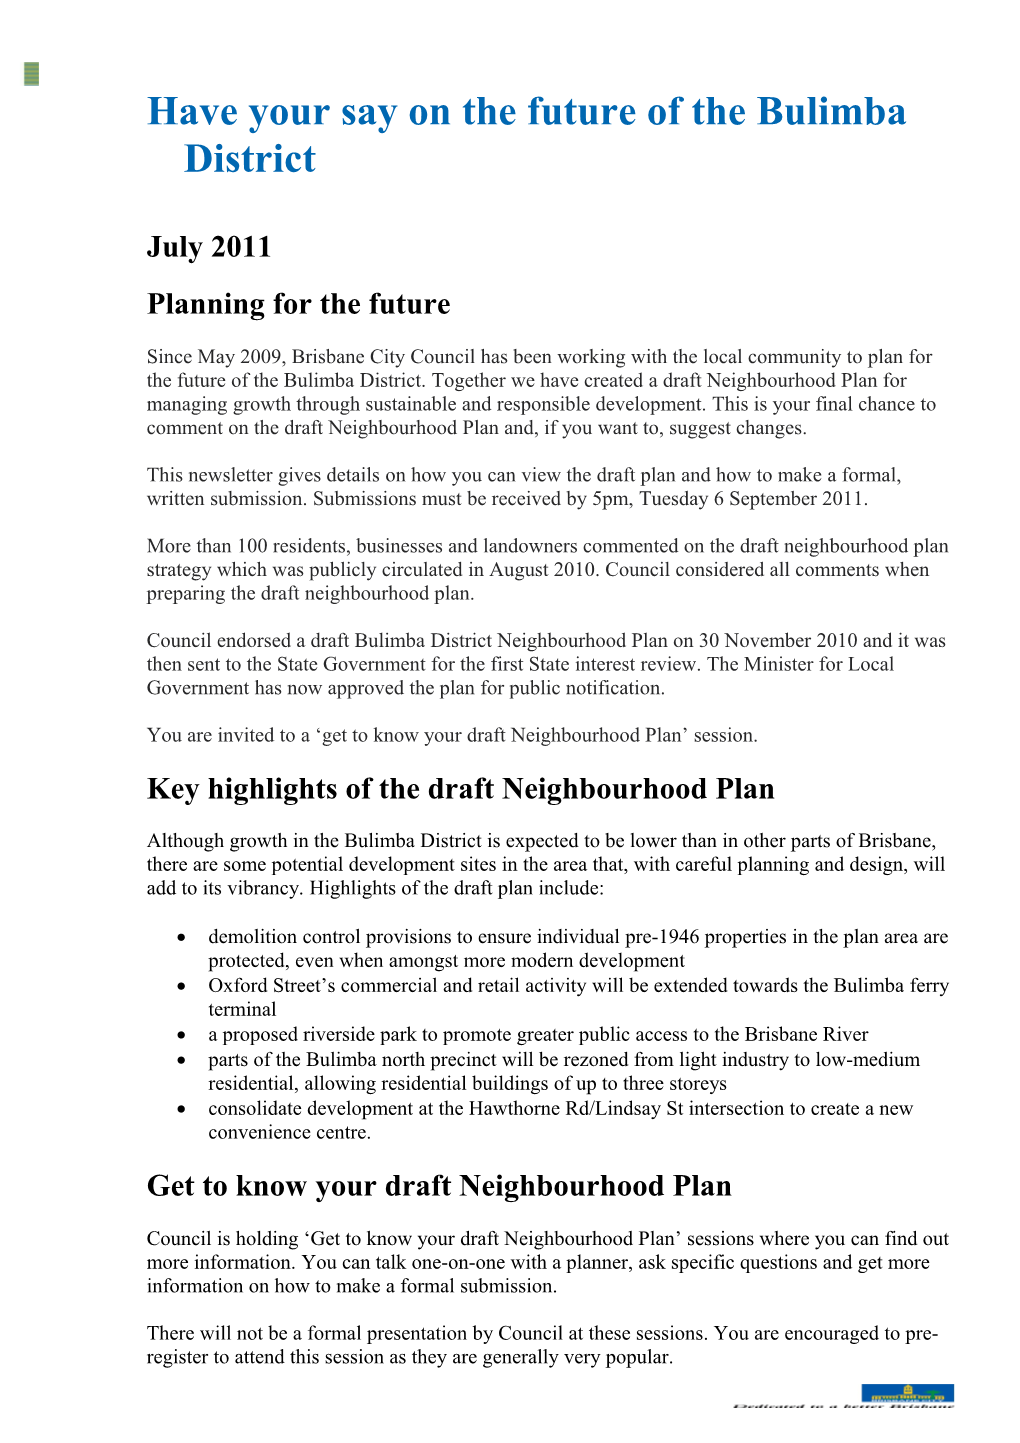 Have Your Say on the Future of the Bulimba District